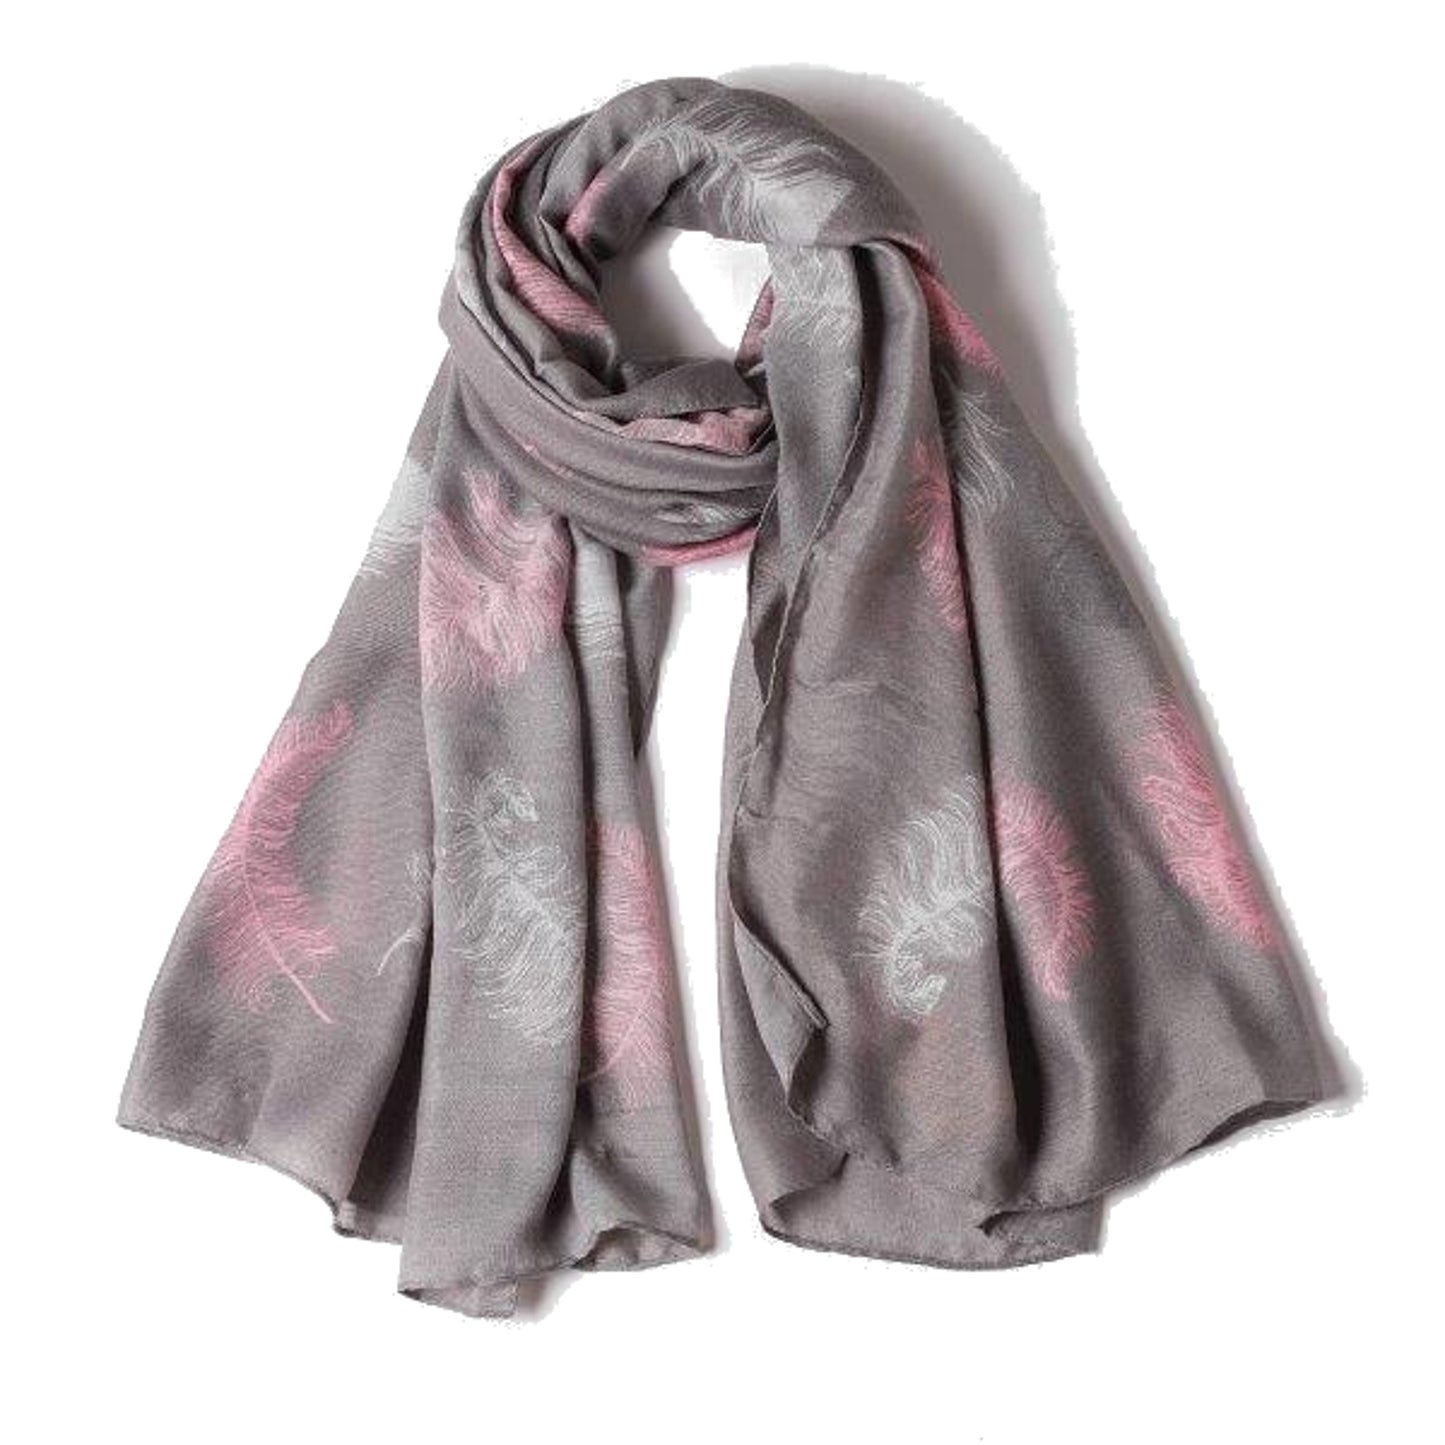 Lou Grey/Feather Print Scarf Made From Recycled Bottles